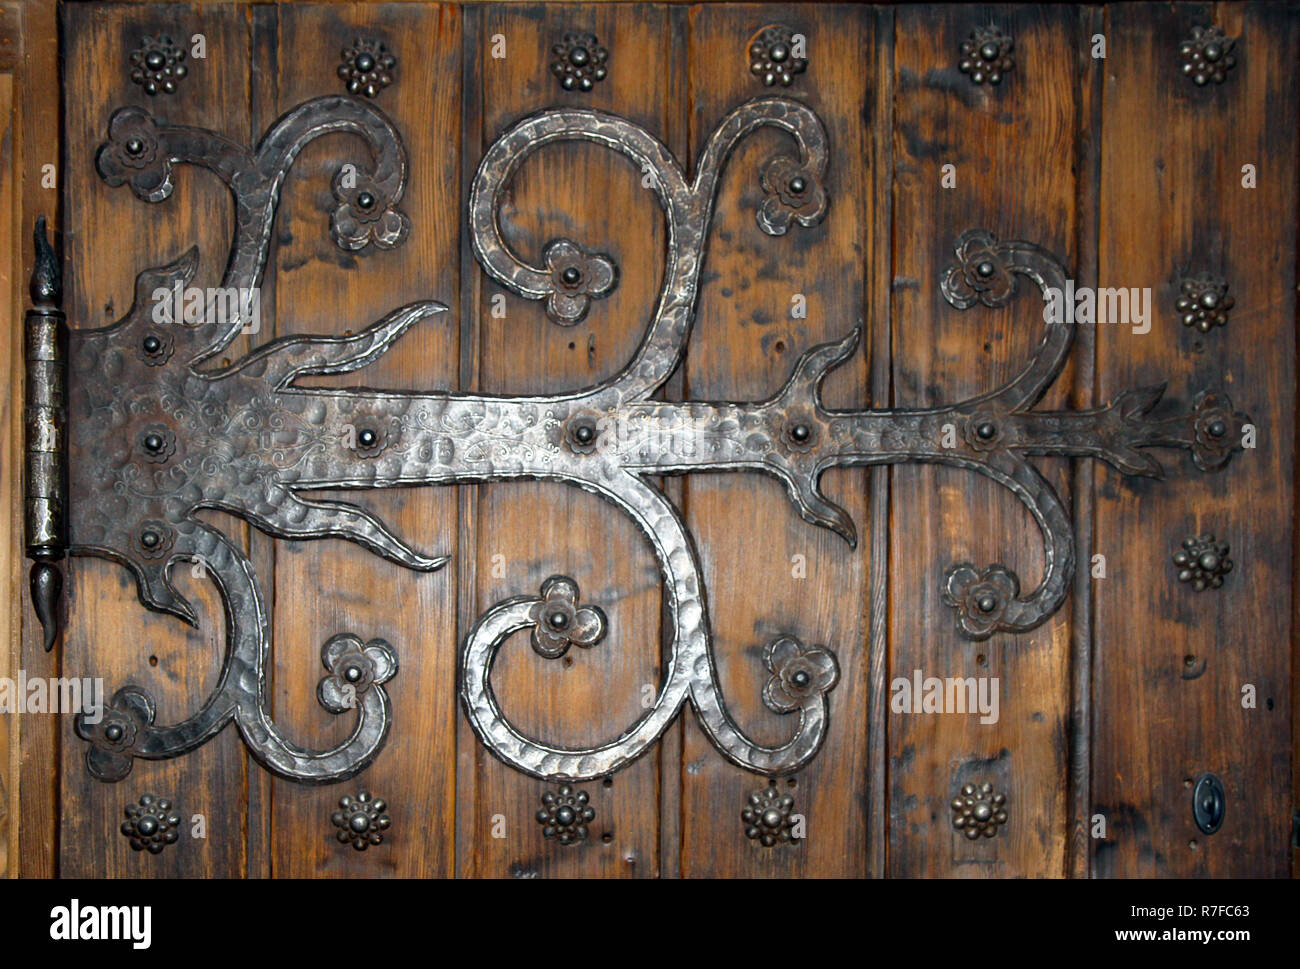 detail of hand crafted ornate iron door hinge Stock Photo